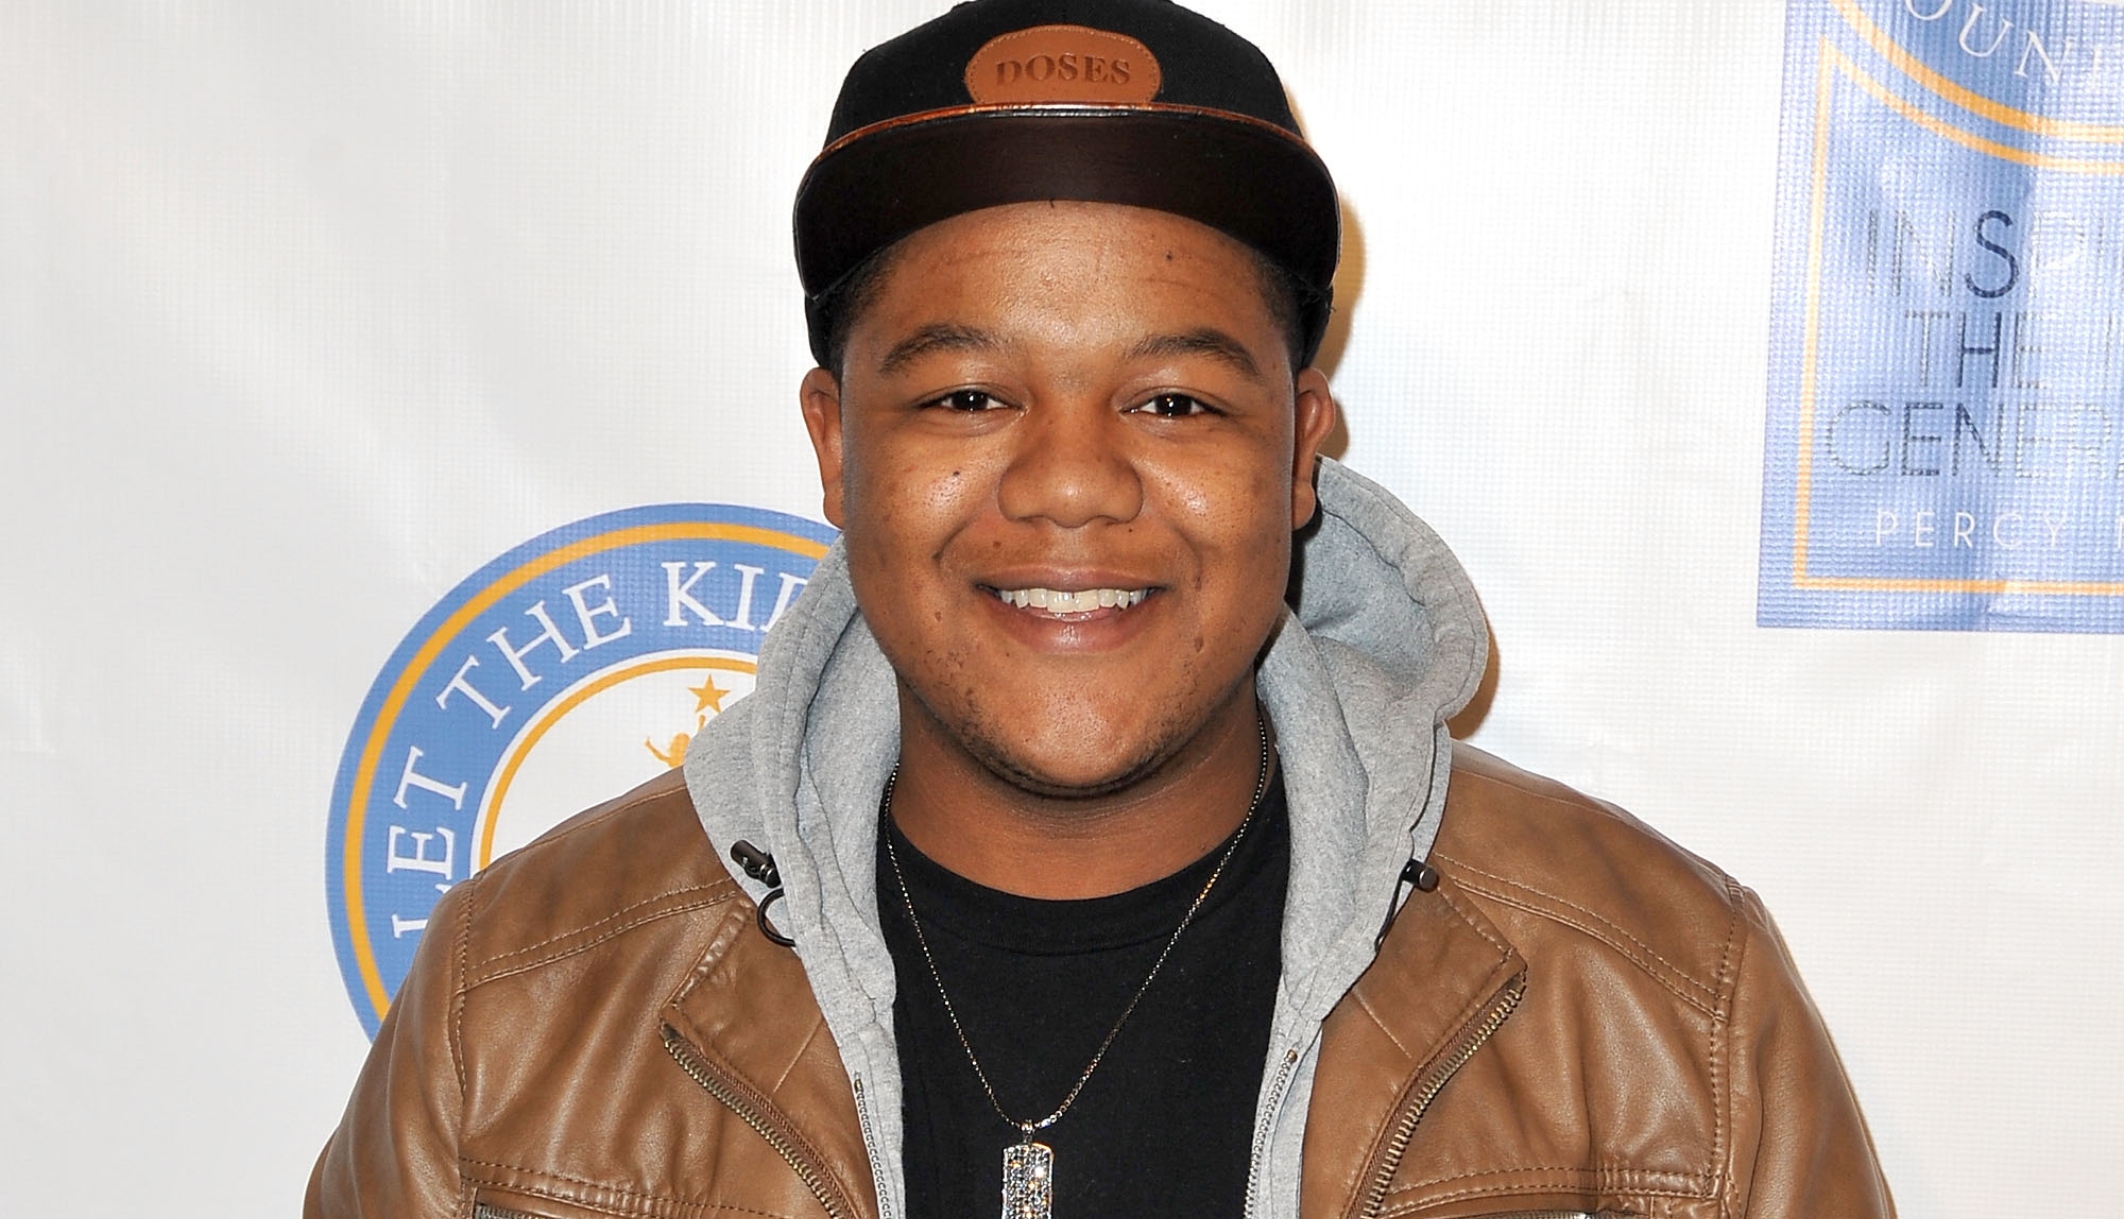 39-facts-about-kyle-massey